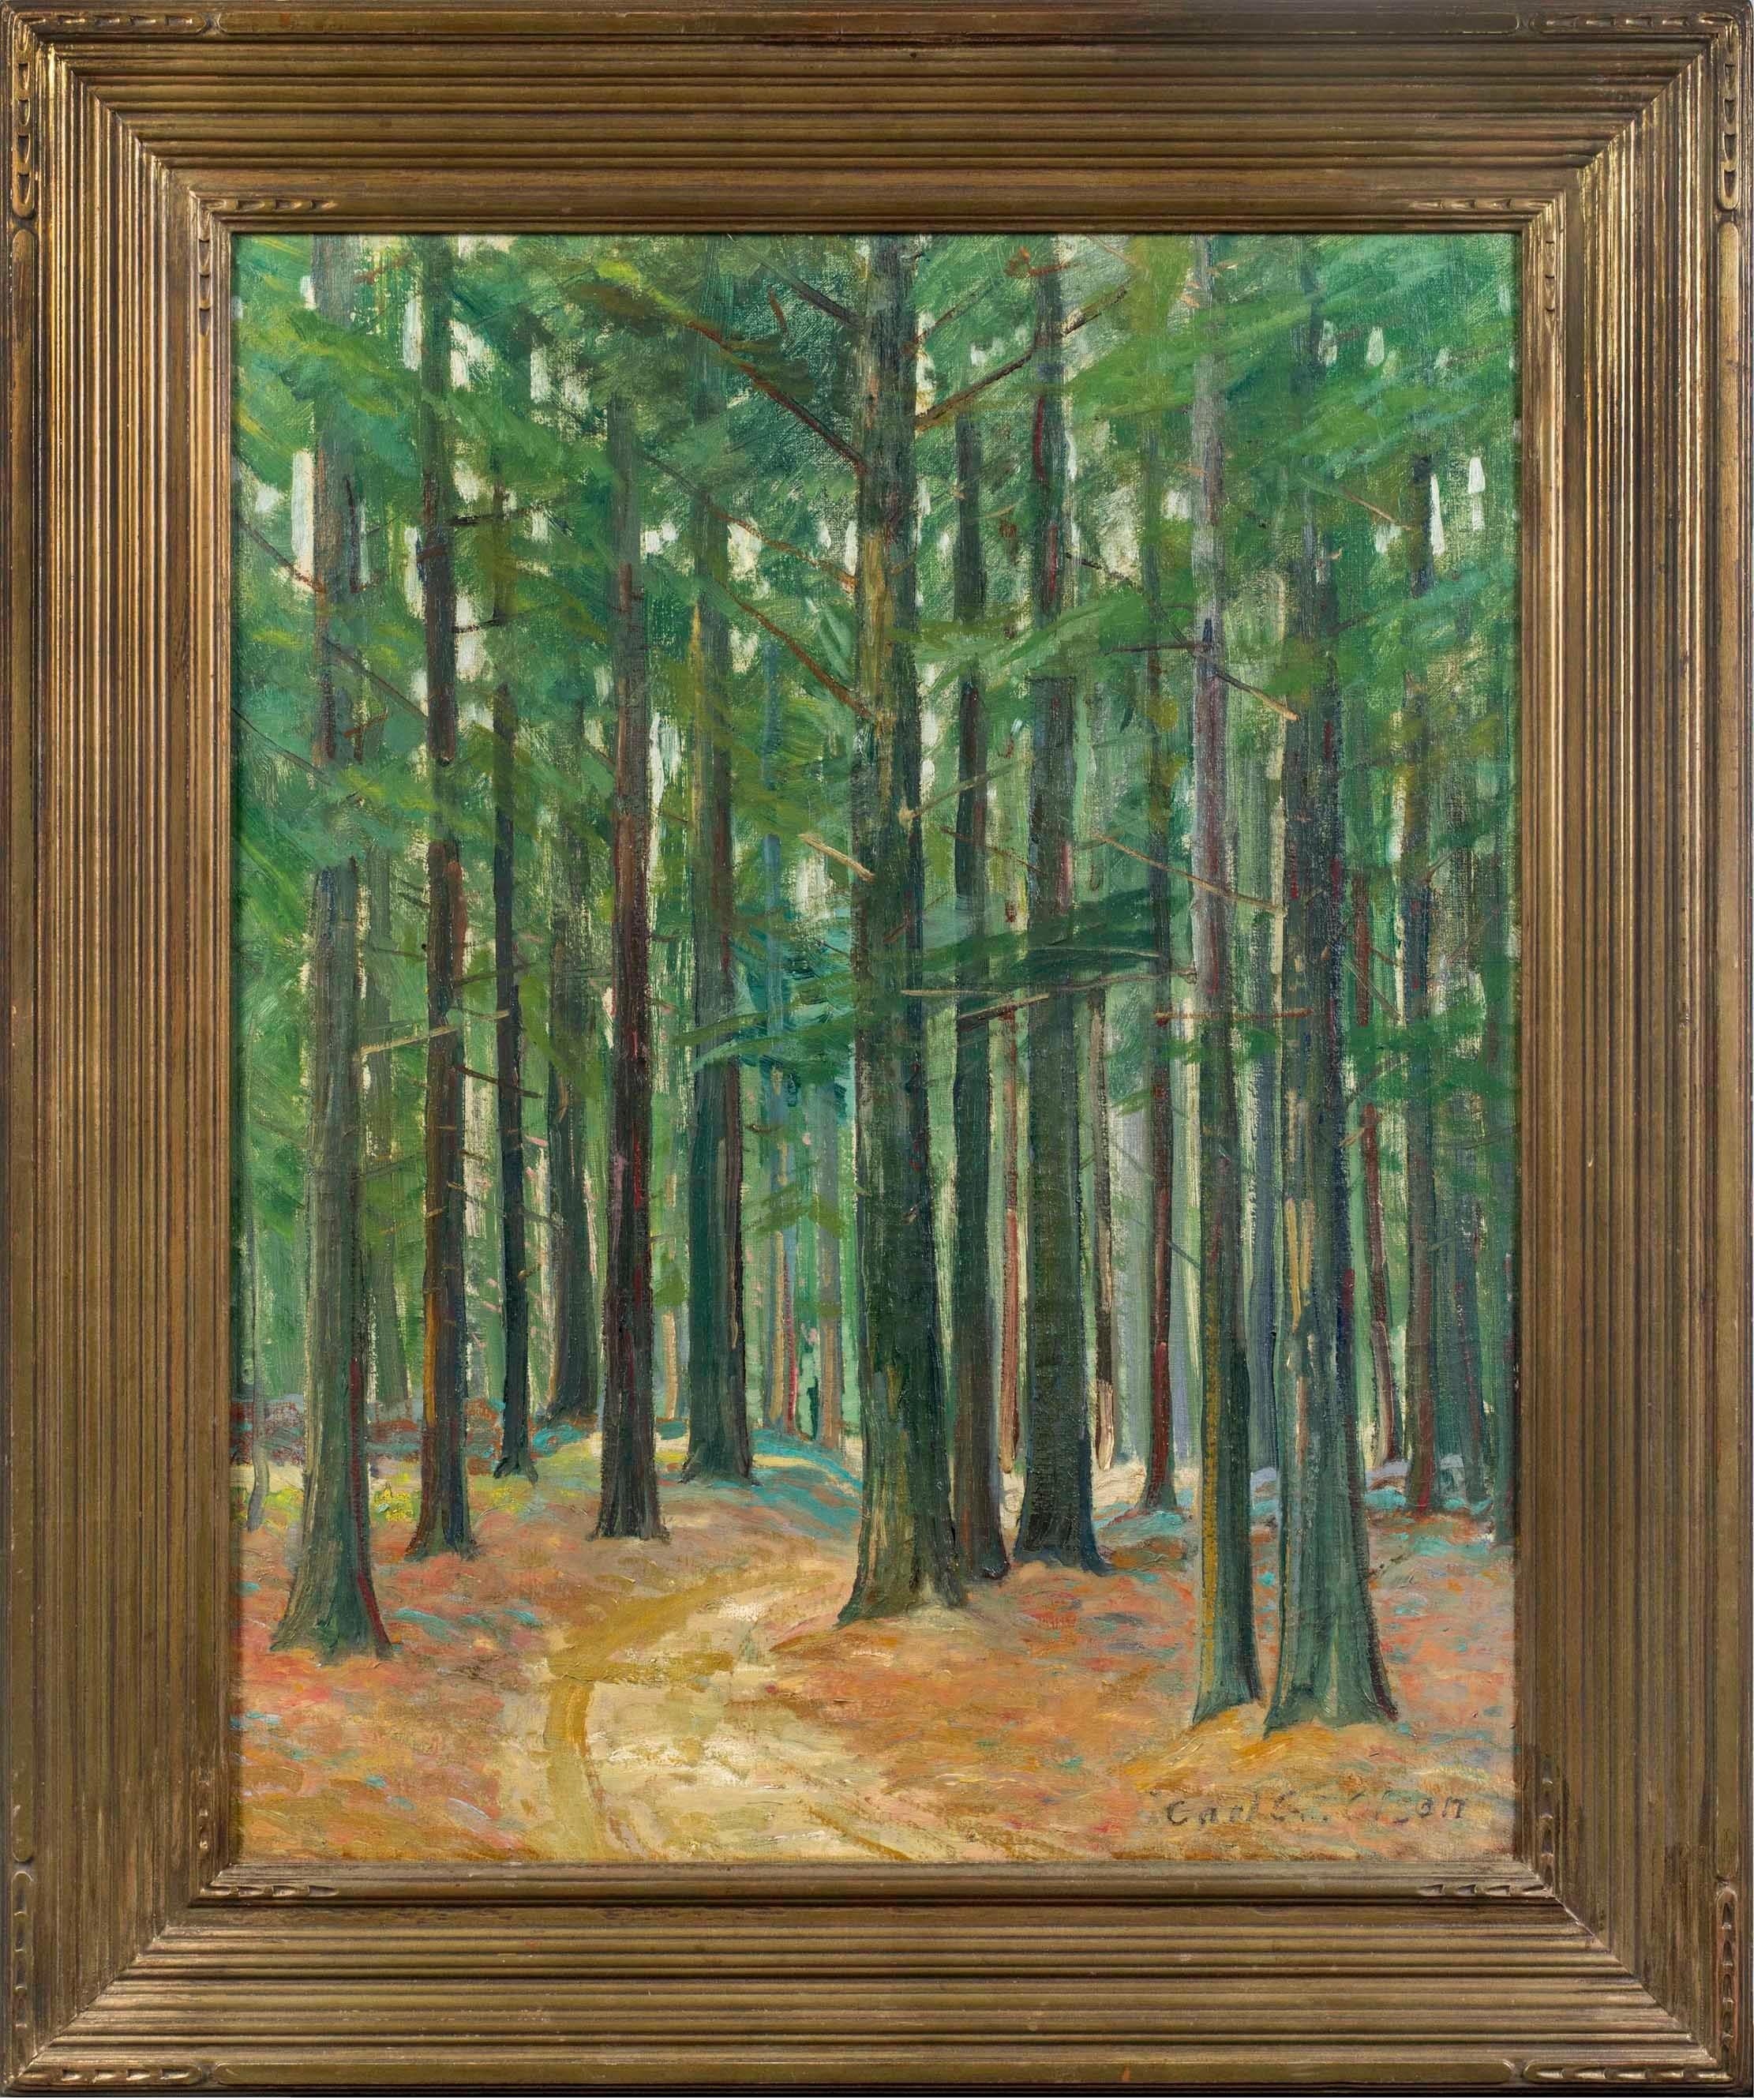 Woodland Gleam, a tonalist landscape by Carl Gustaf Theodore Olson (1875-1952)

Carl Gustaf Theodore Olson (1875-1952)
Woodland Gleam
Oil on canvas
30 1/16 x 24 3/8 inches
Signed lower right

Carl Gustaf Theodore Olson was born on June 7, 1875 in